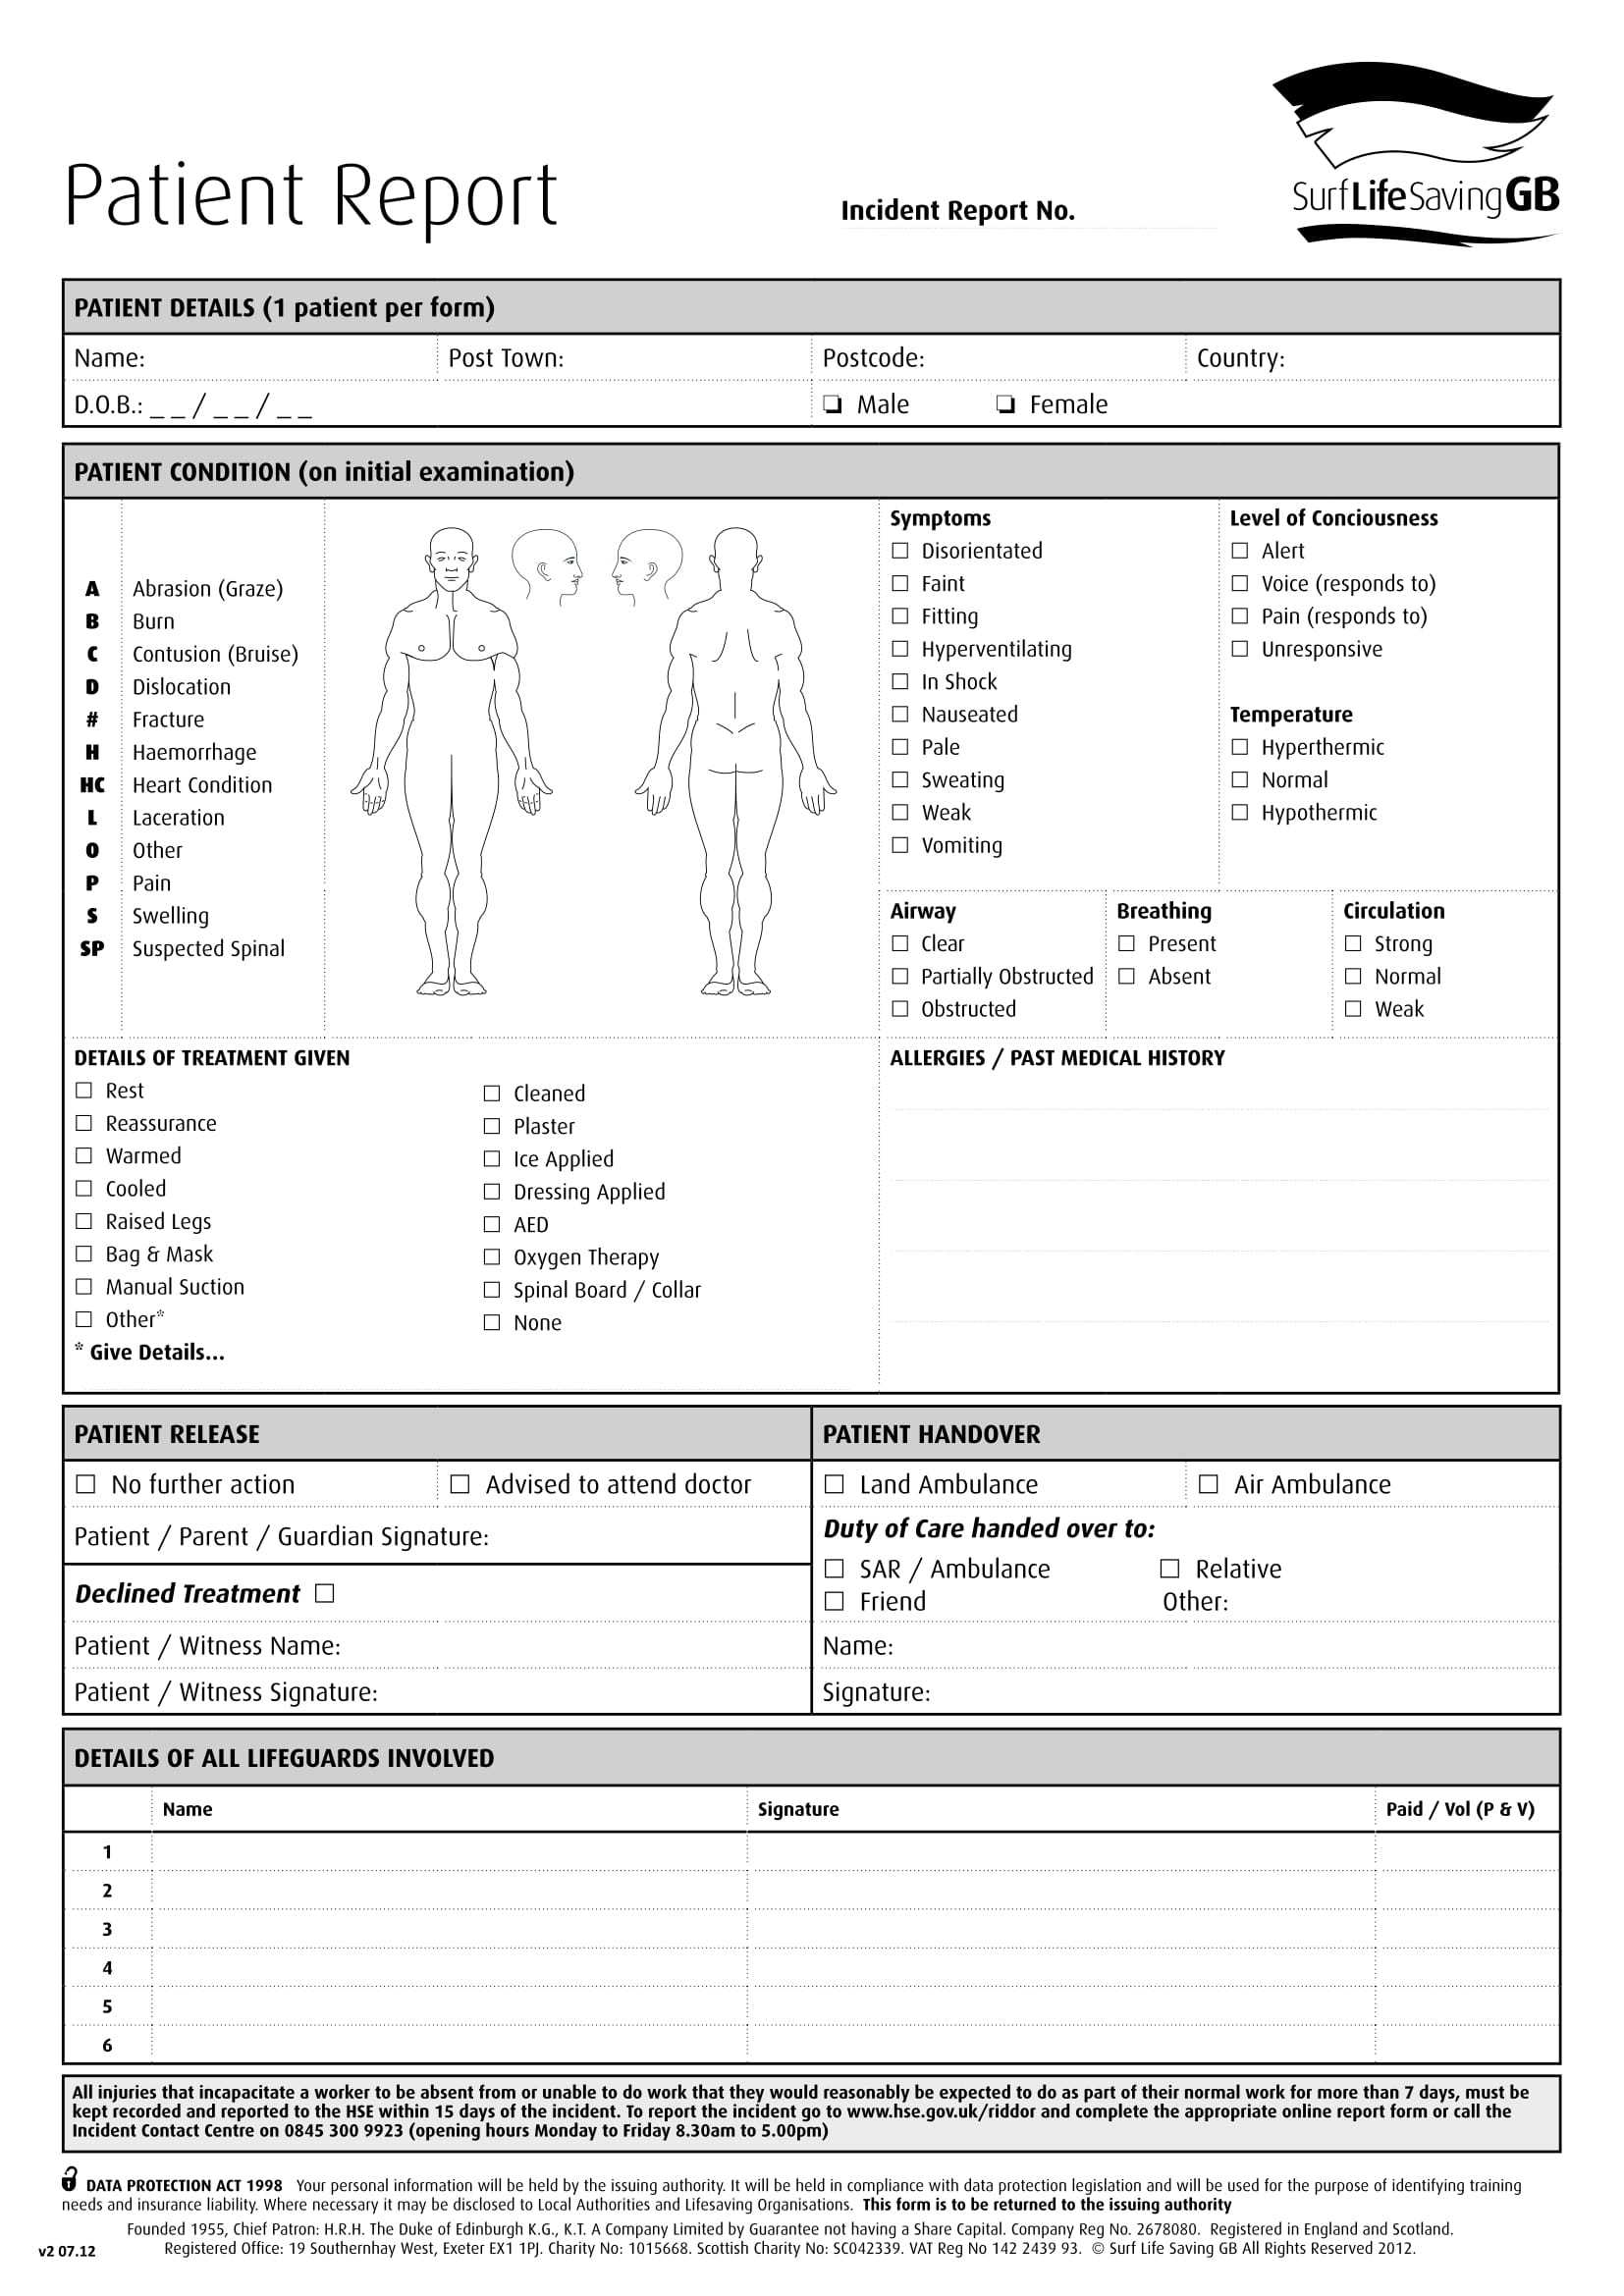 Free 14+ Patient Report Forms In Pdf | Ms Word For Generic Incident Report Template